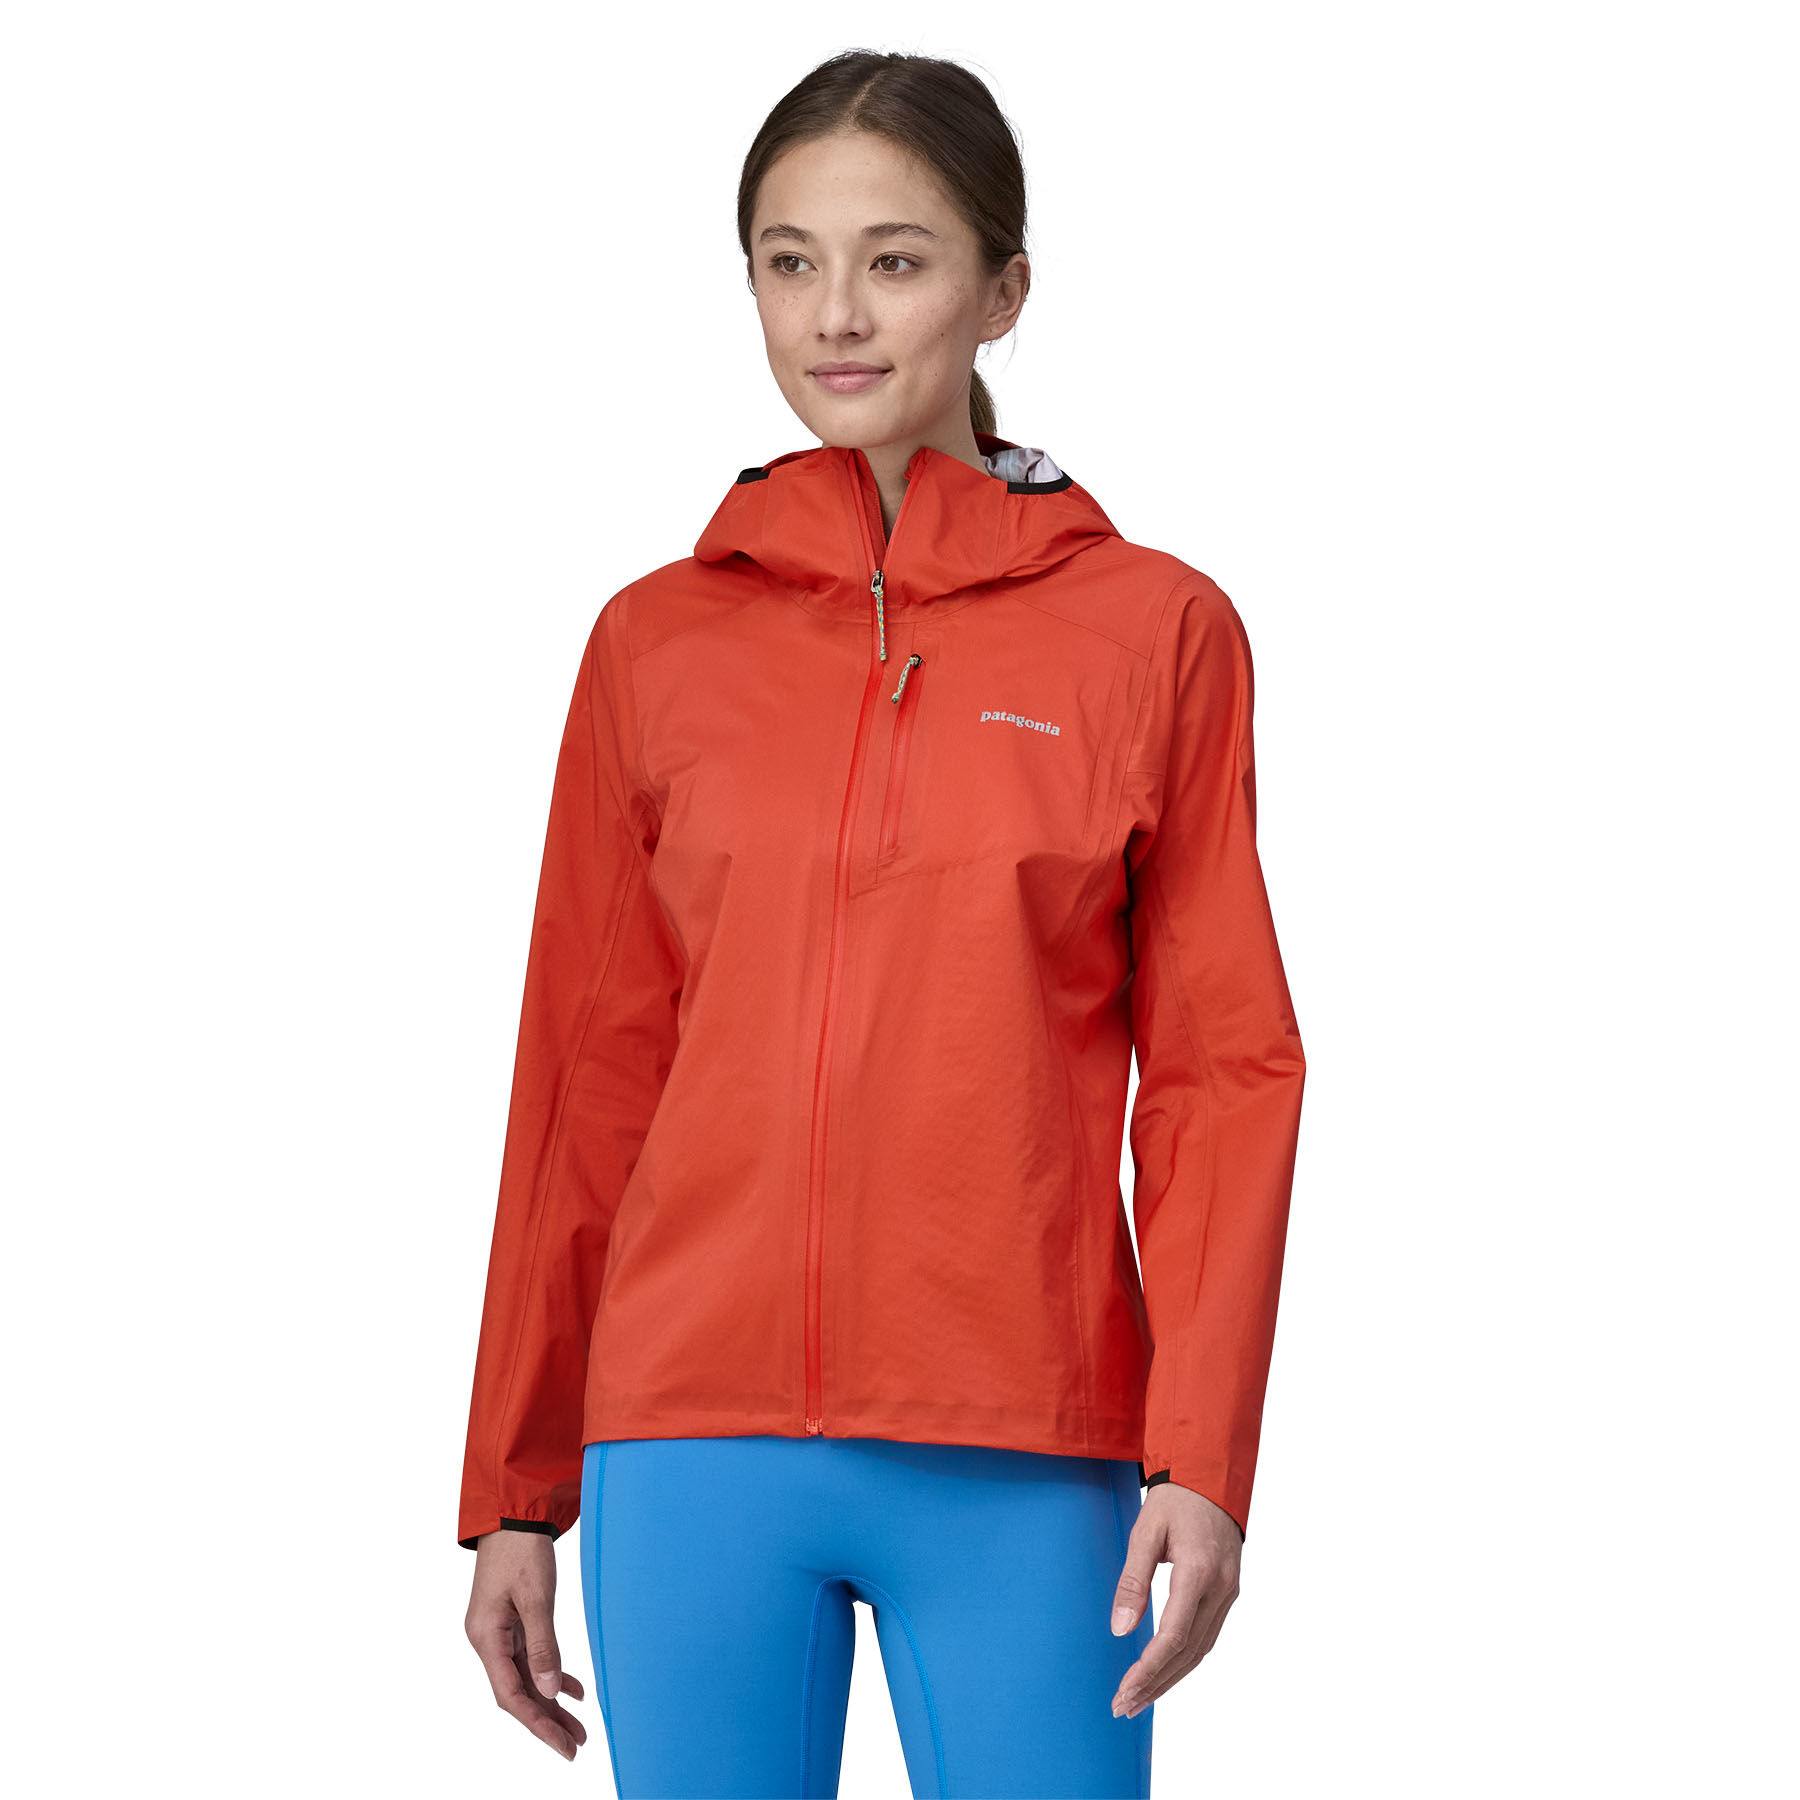 Patagonia Storm Racer Jacket - Chaqueta impermeable - Mujer | Hardloop